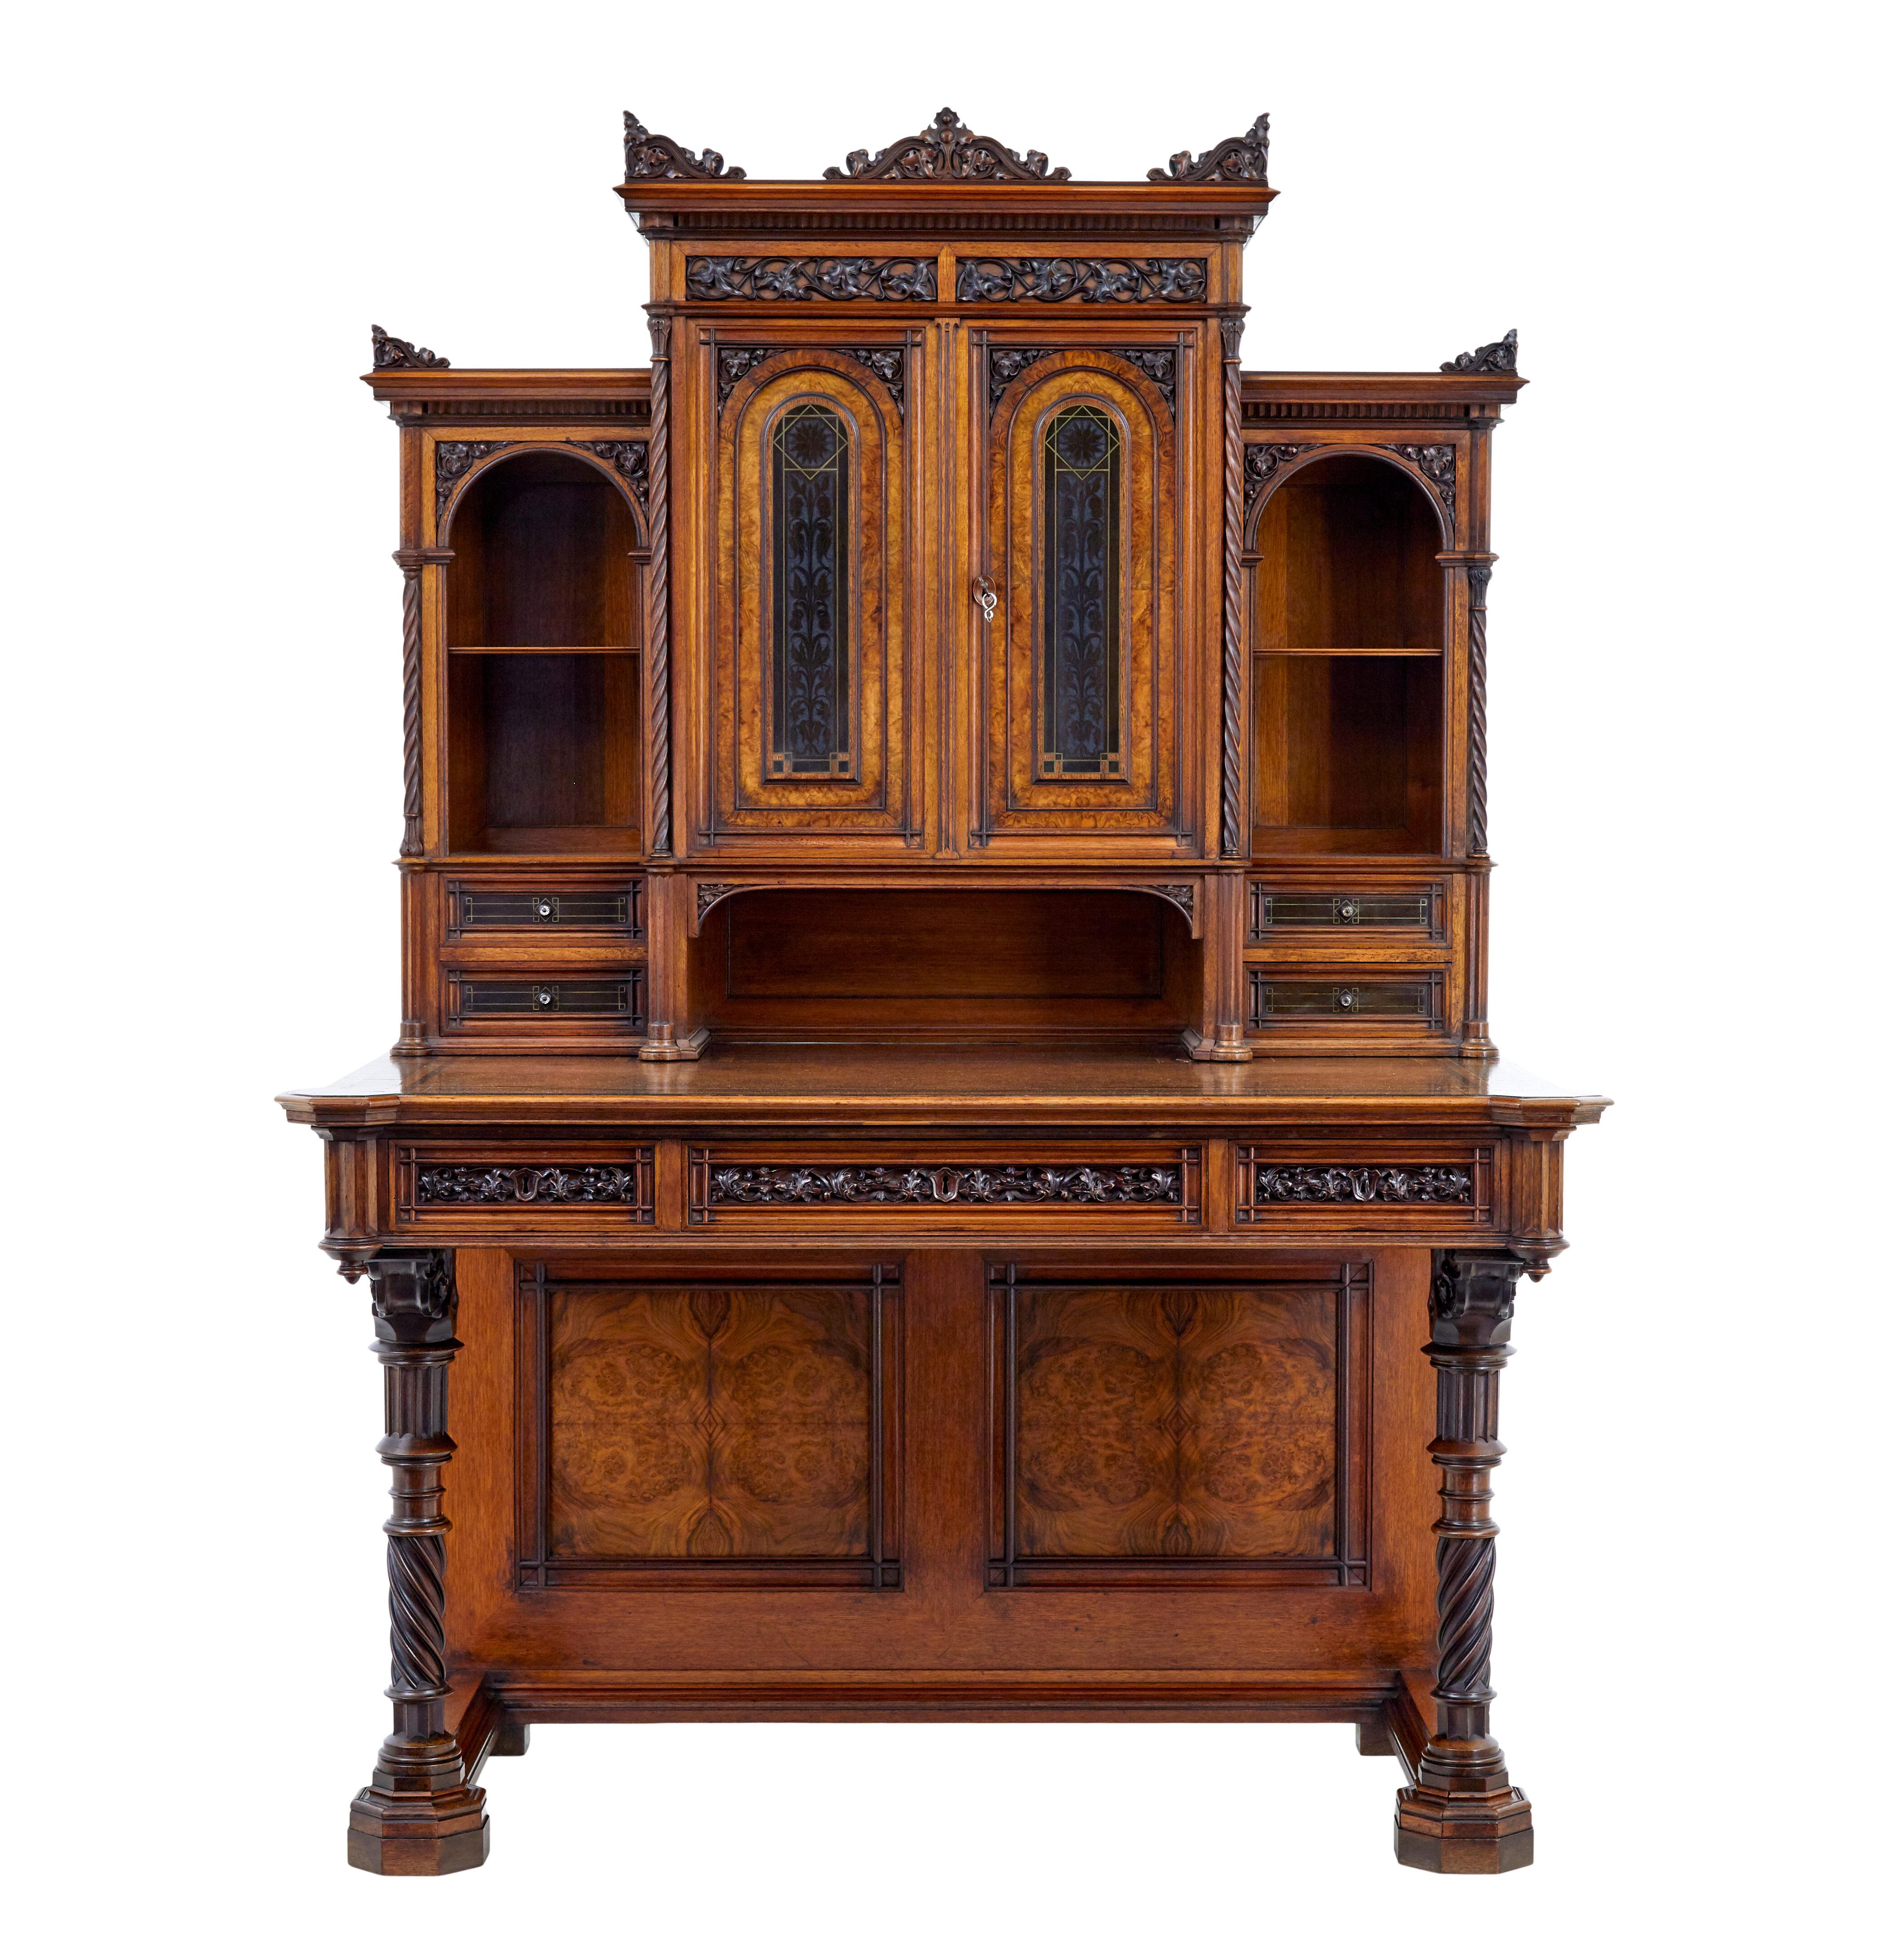 Swedish Eclectic 19th century carved walnut desk and chair For Sale